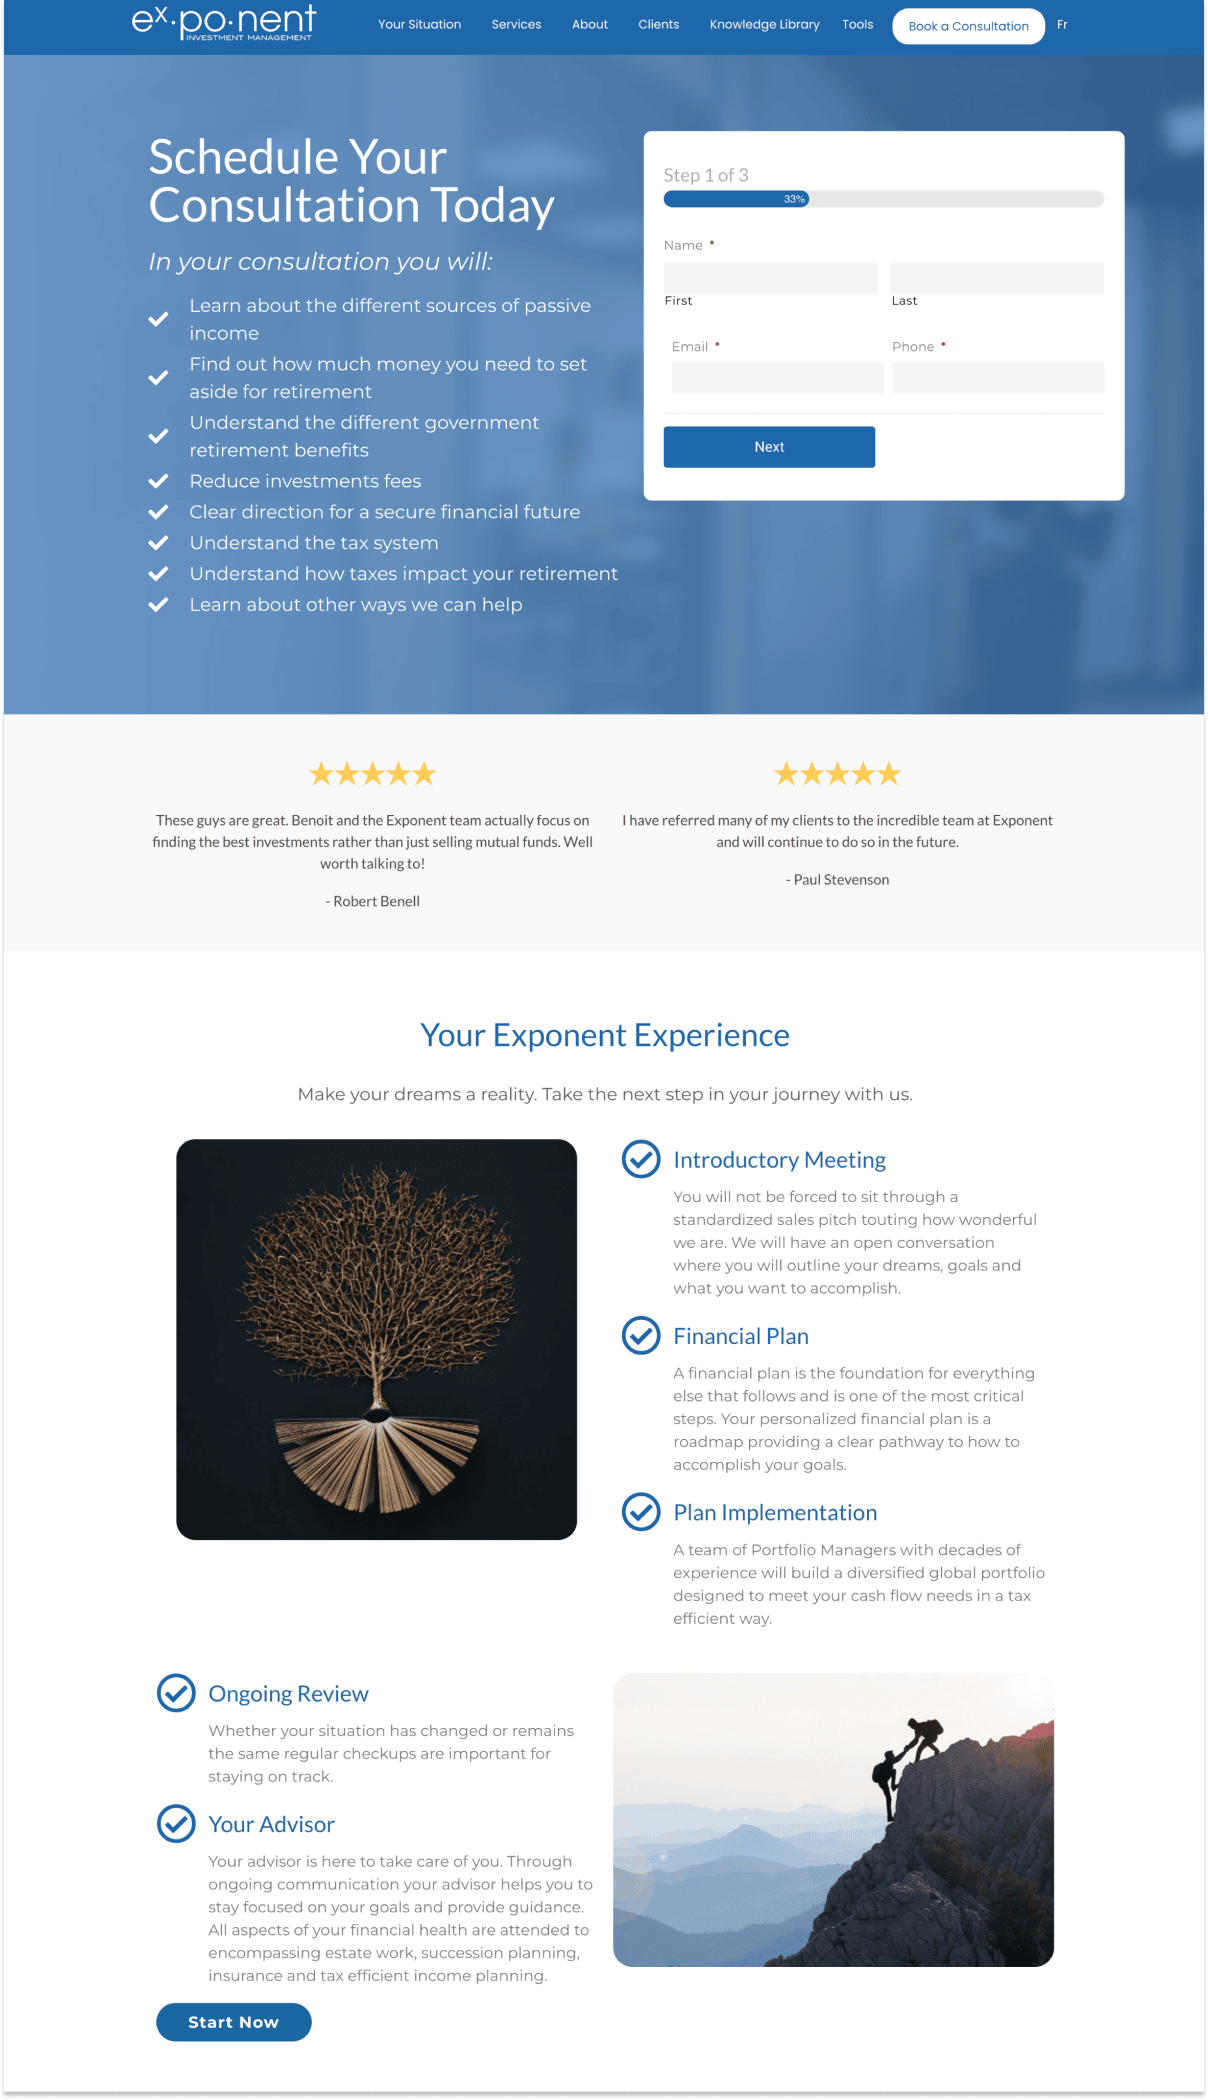 Exponent's free consultation booking page